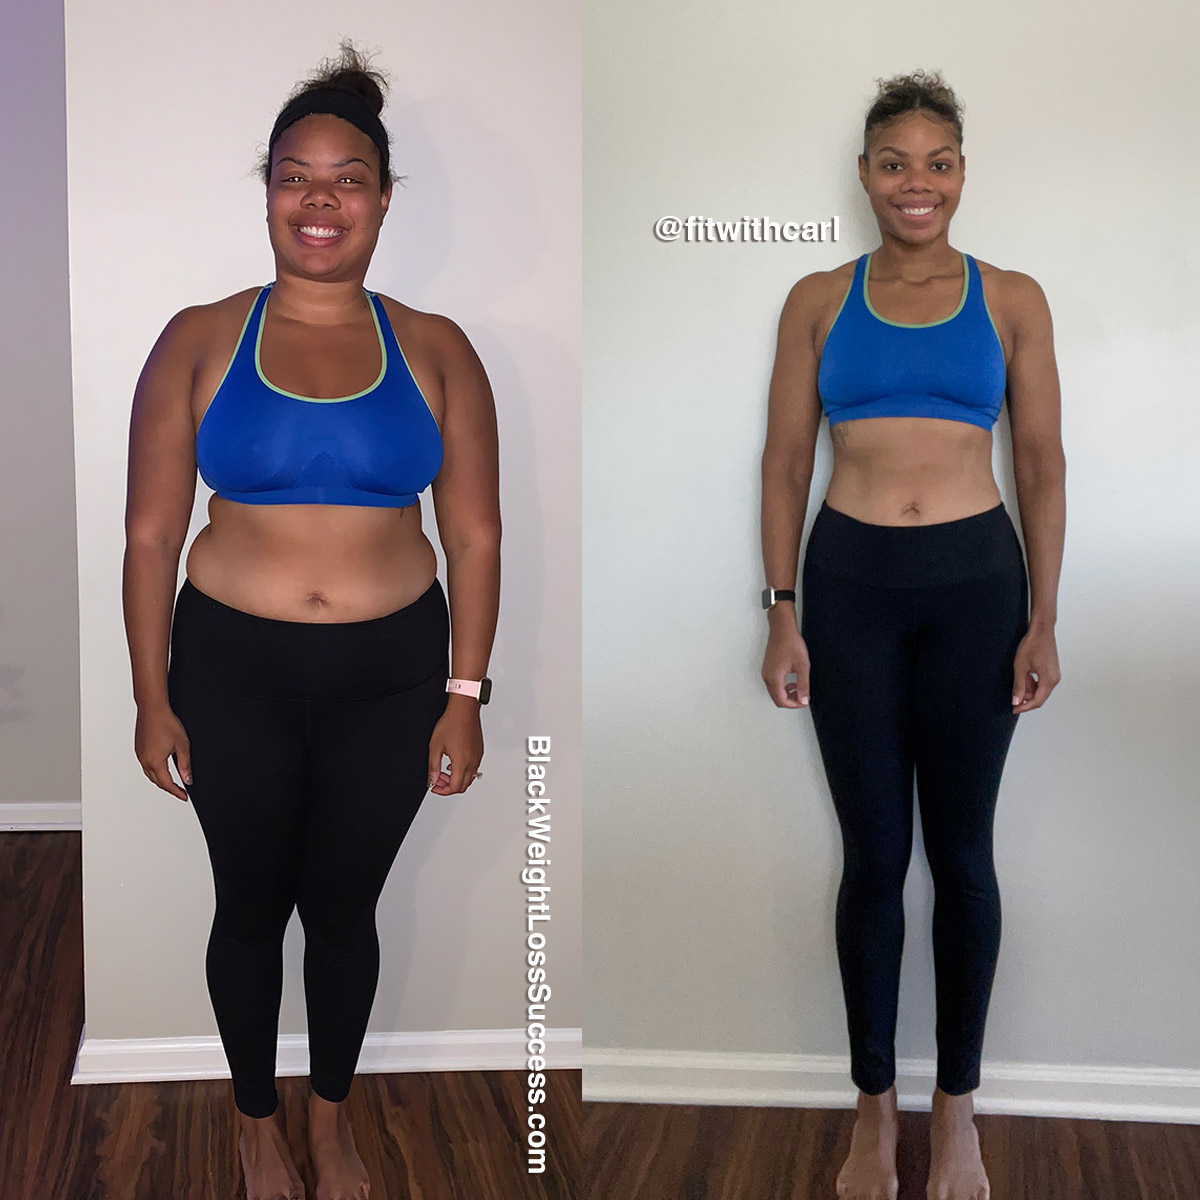 Carley lost 85 pounds | Black Weight Loss Success